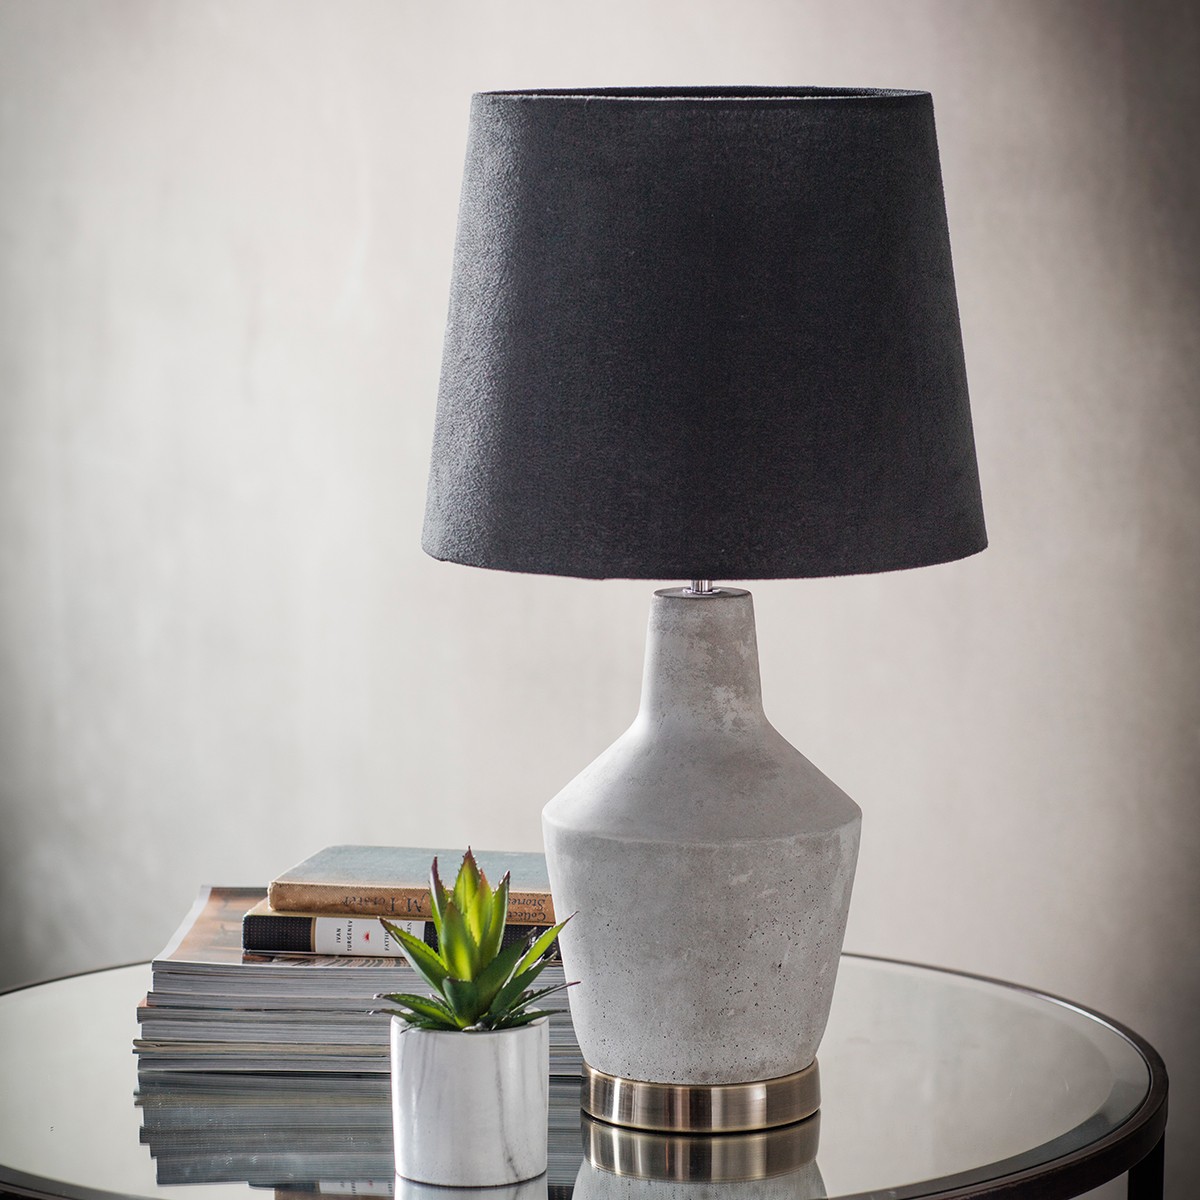 Stone effect table lamp with a black shade